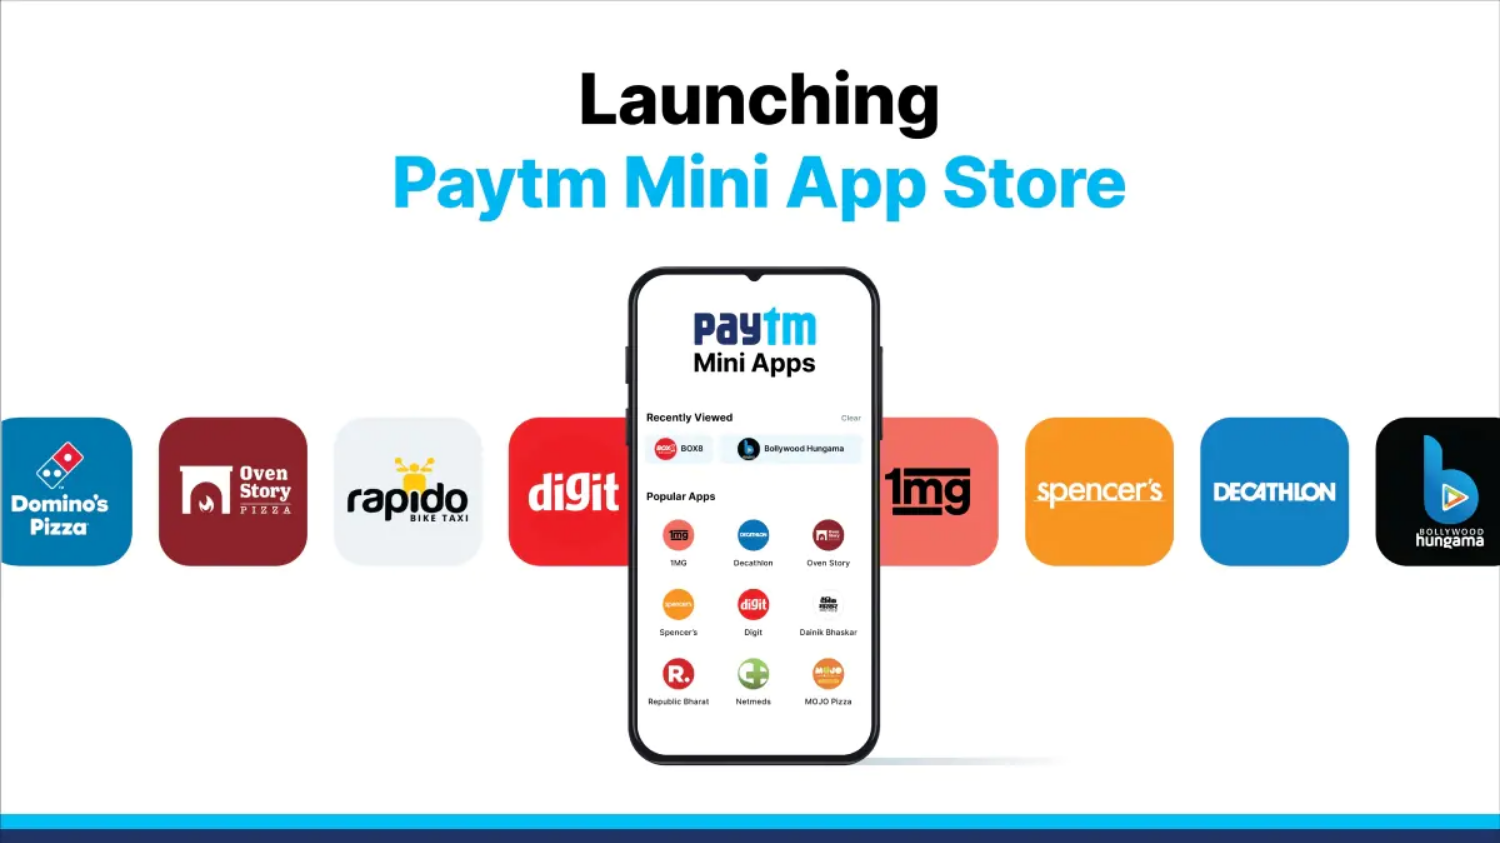 Paytm Mini App Store Launched for Indian Developers, to List Over 300 Apps Including Domino’s Pizza and Ola